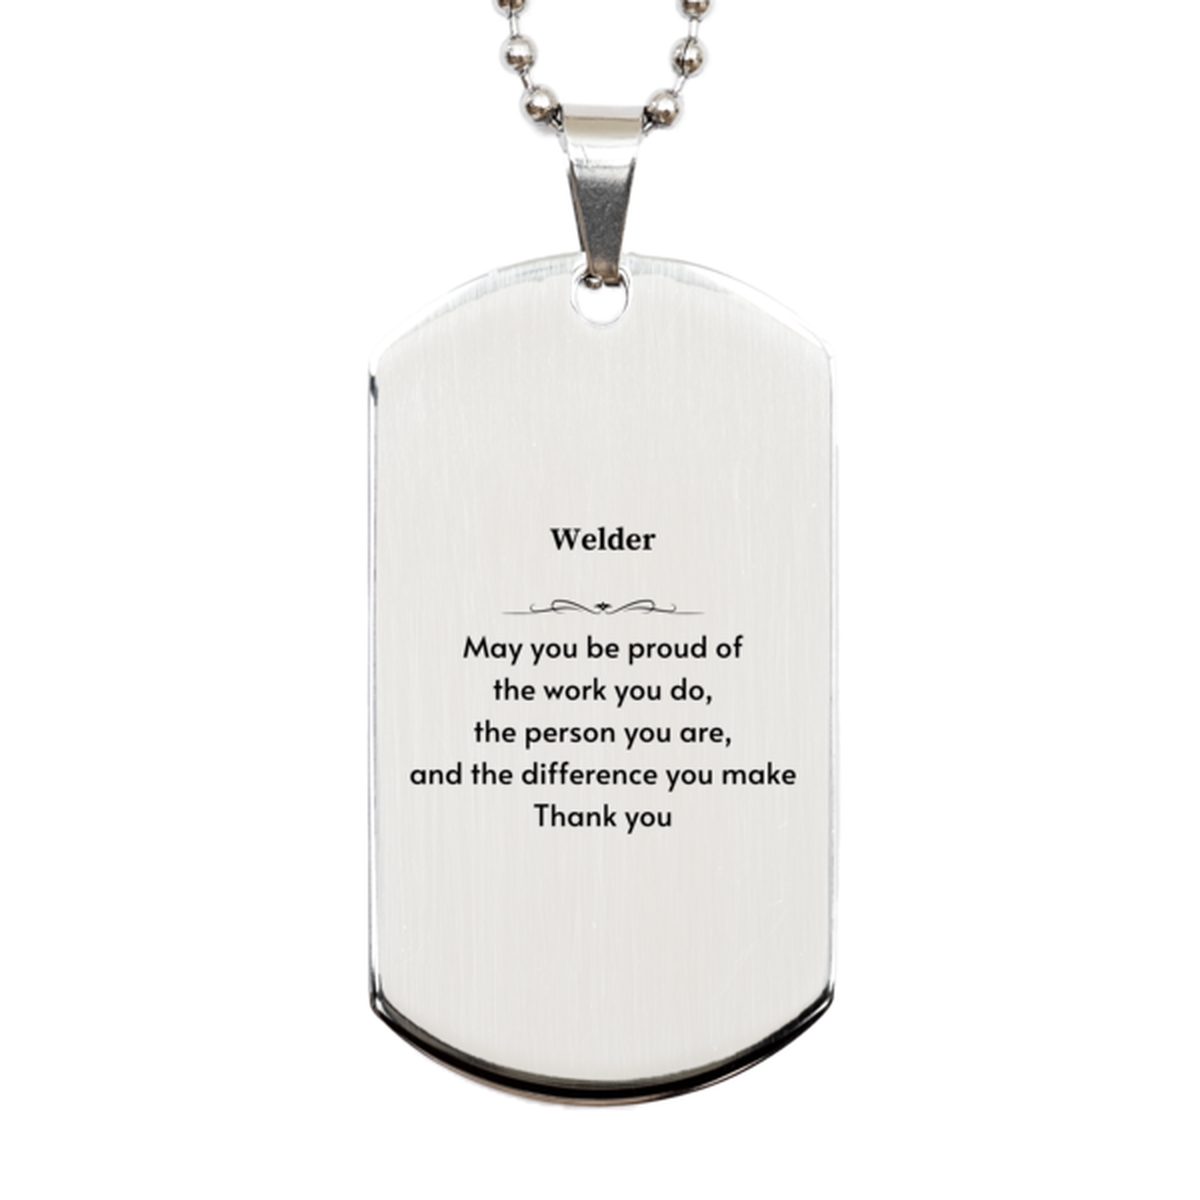 Heartwarming Silver Dog Tag Retirement Coworkers Gifts for Welder, Welder May You be proud of the work you do, the person you are Gifts for Boss Men Women Friends